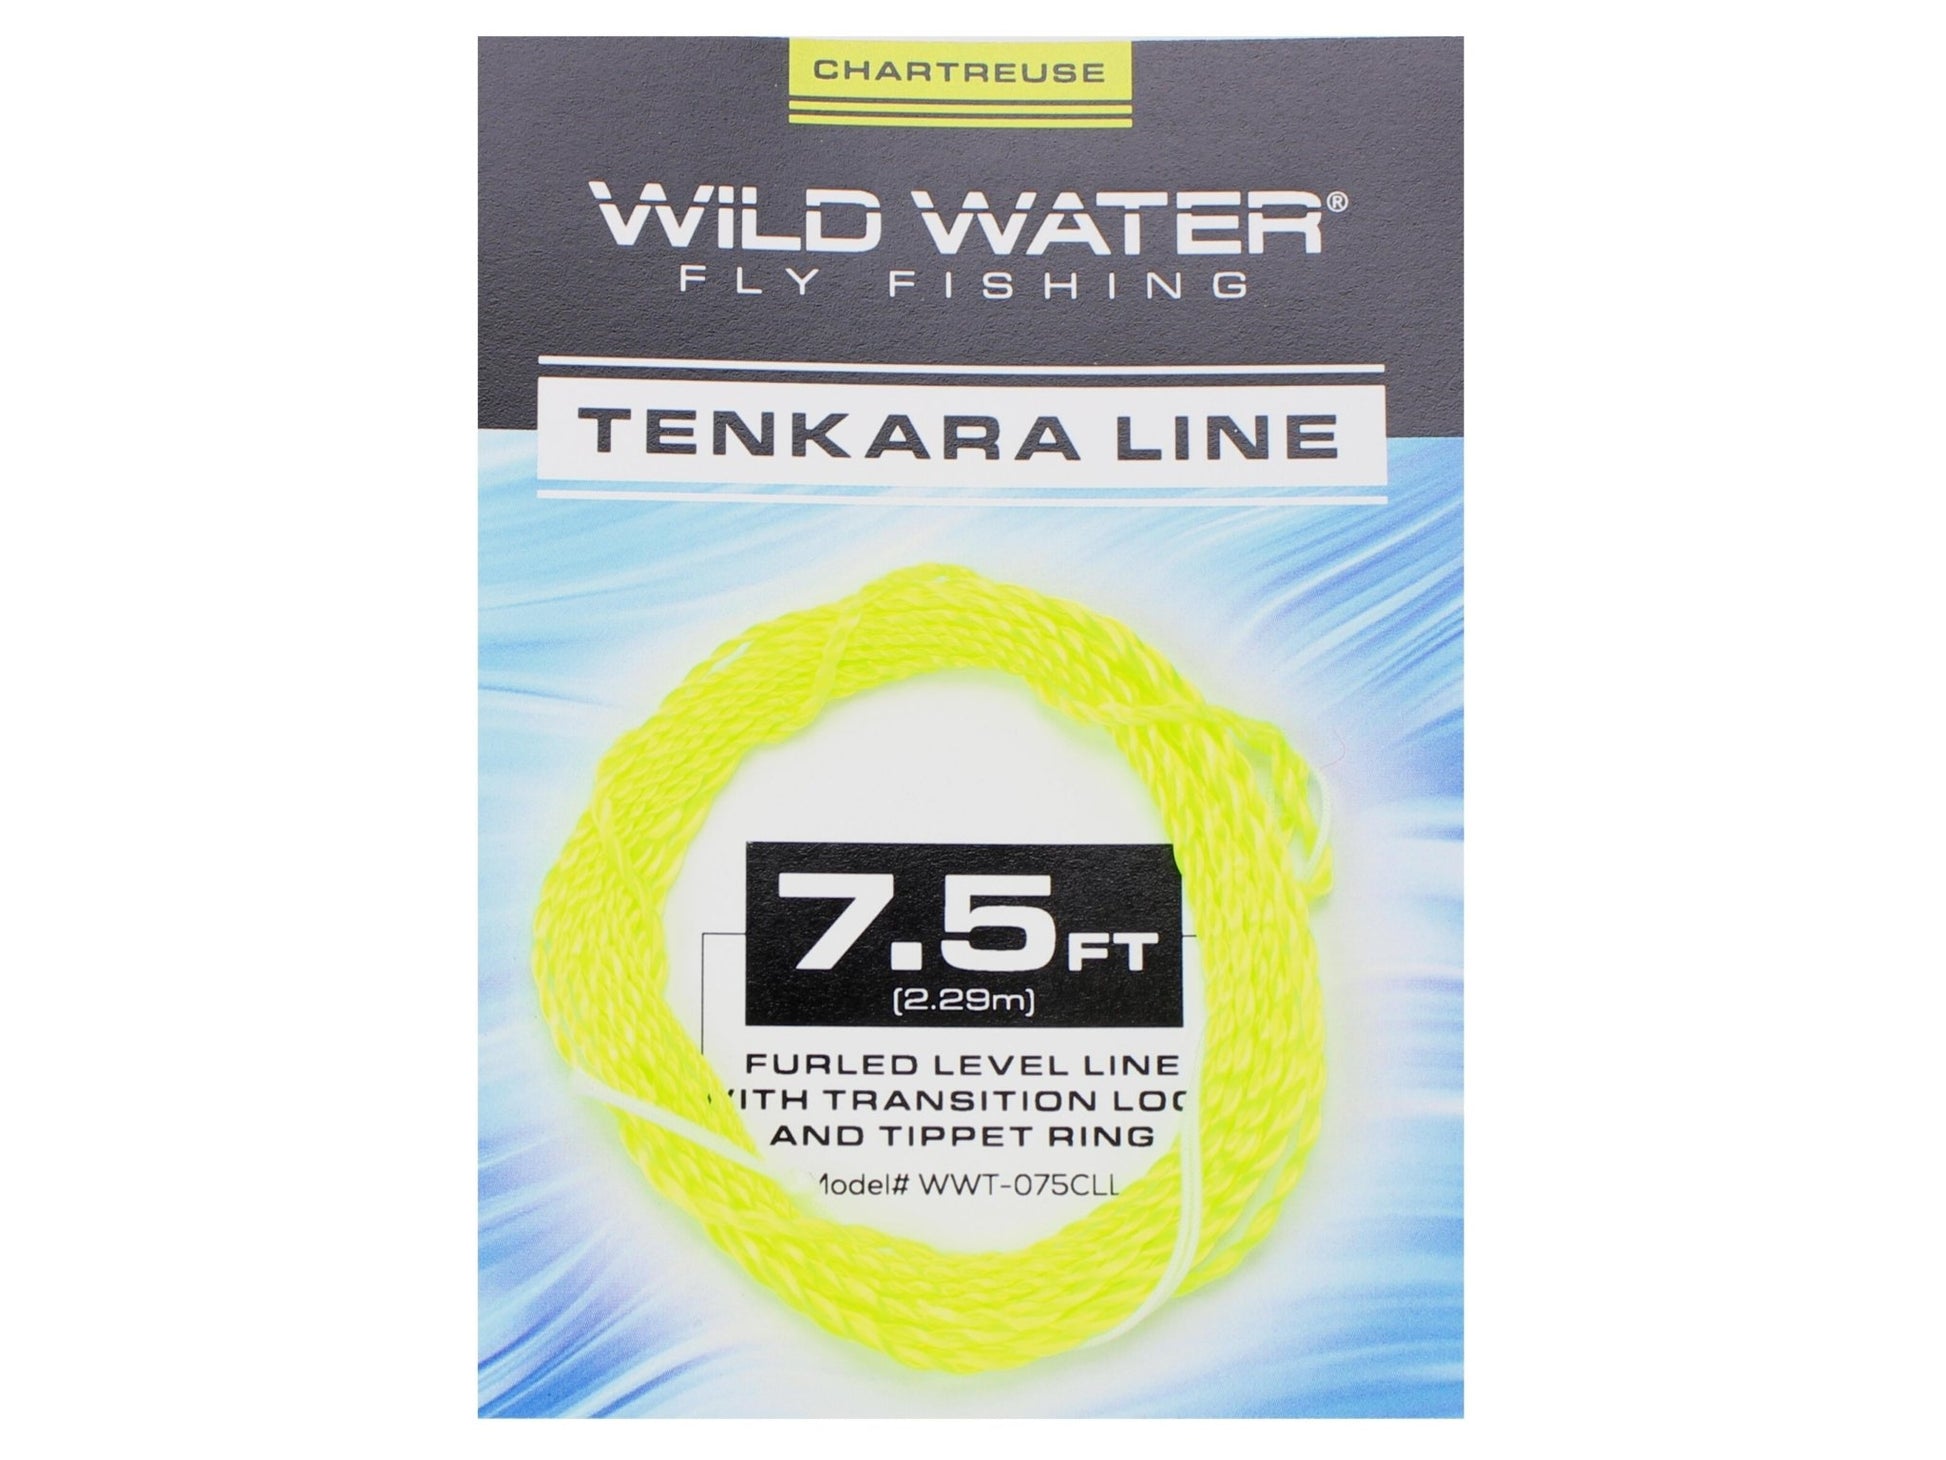 Wild Water Fly Fishing 7.5' Chartreuse Furled Level Tenkara Line - Angler's Pro Tackle & Outdoors